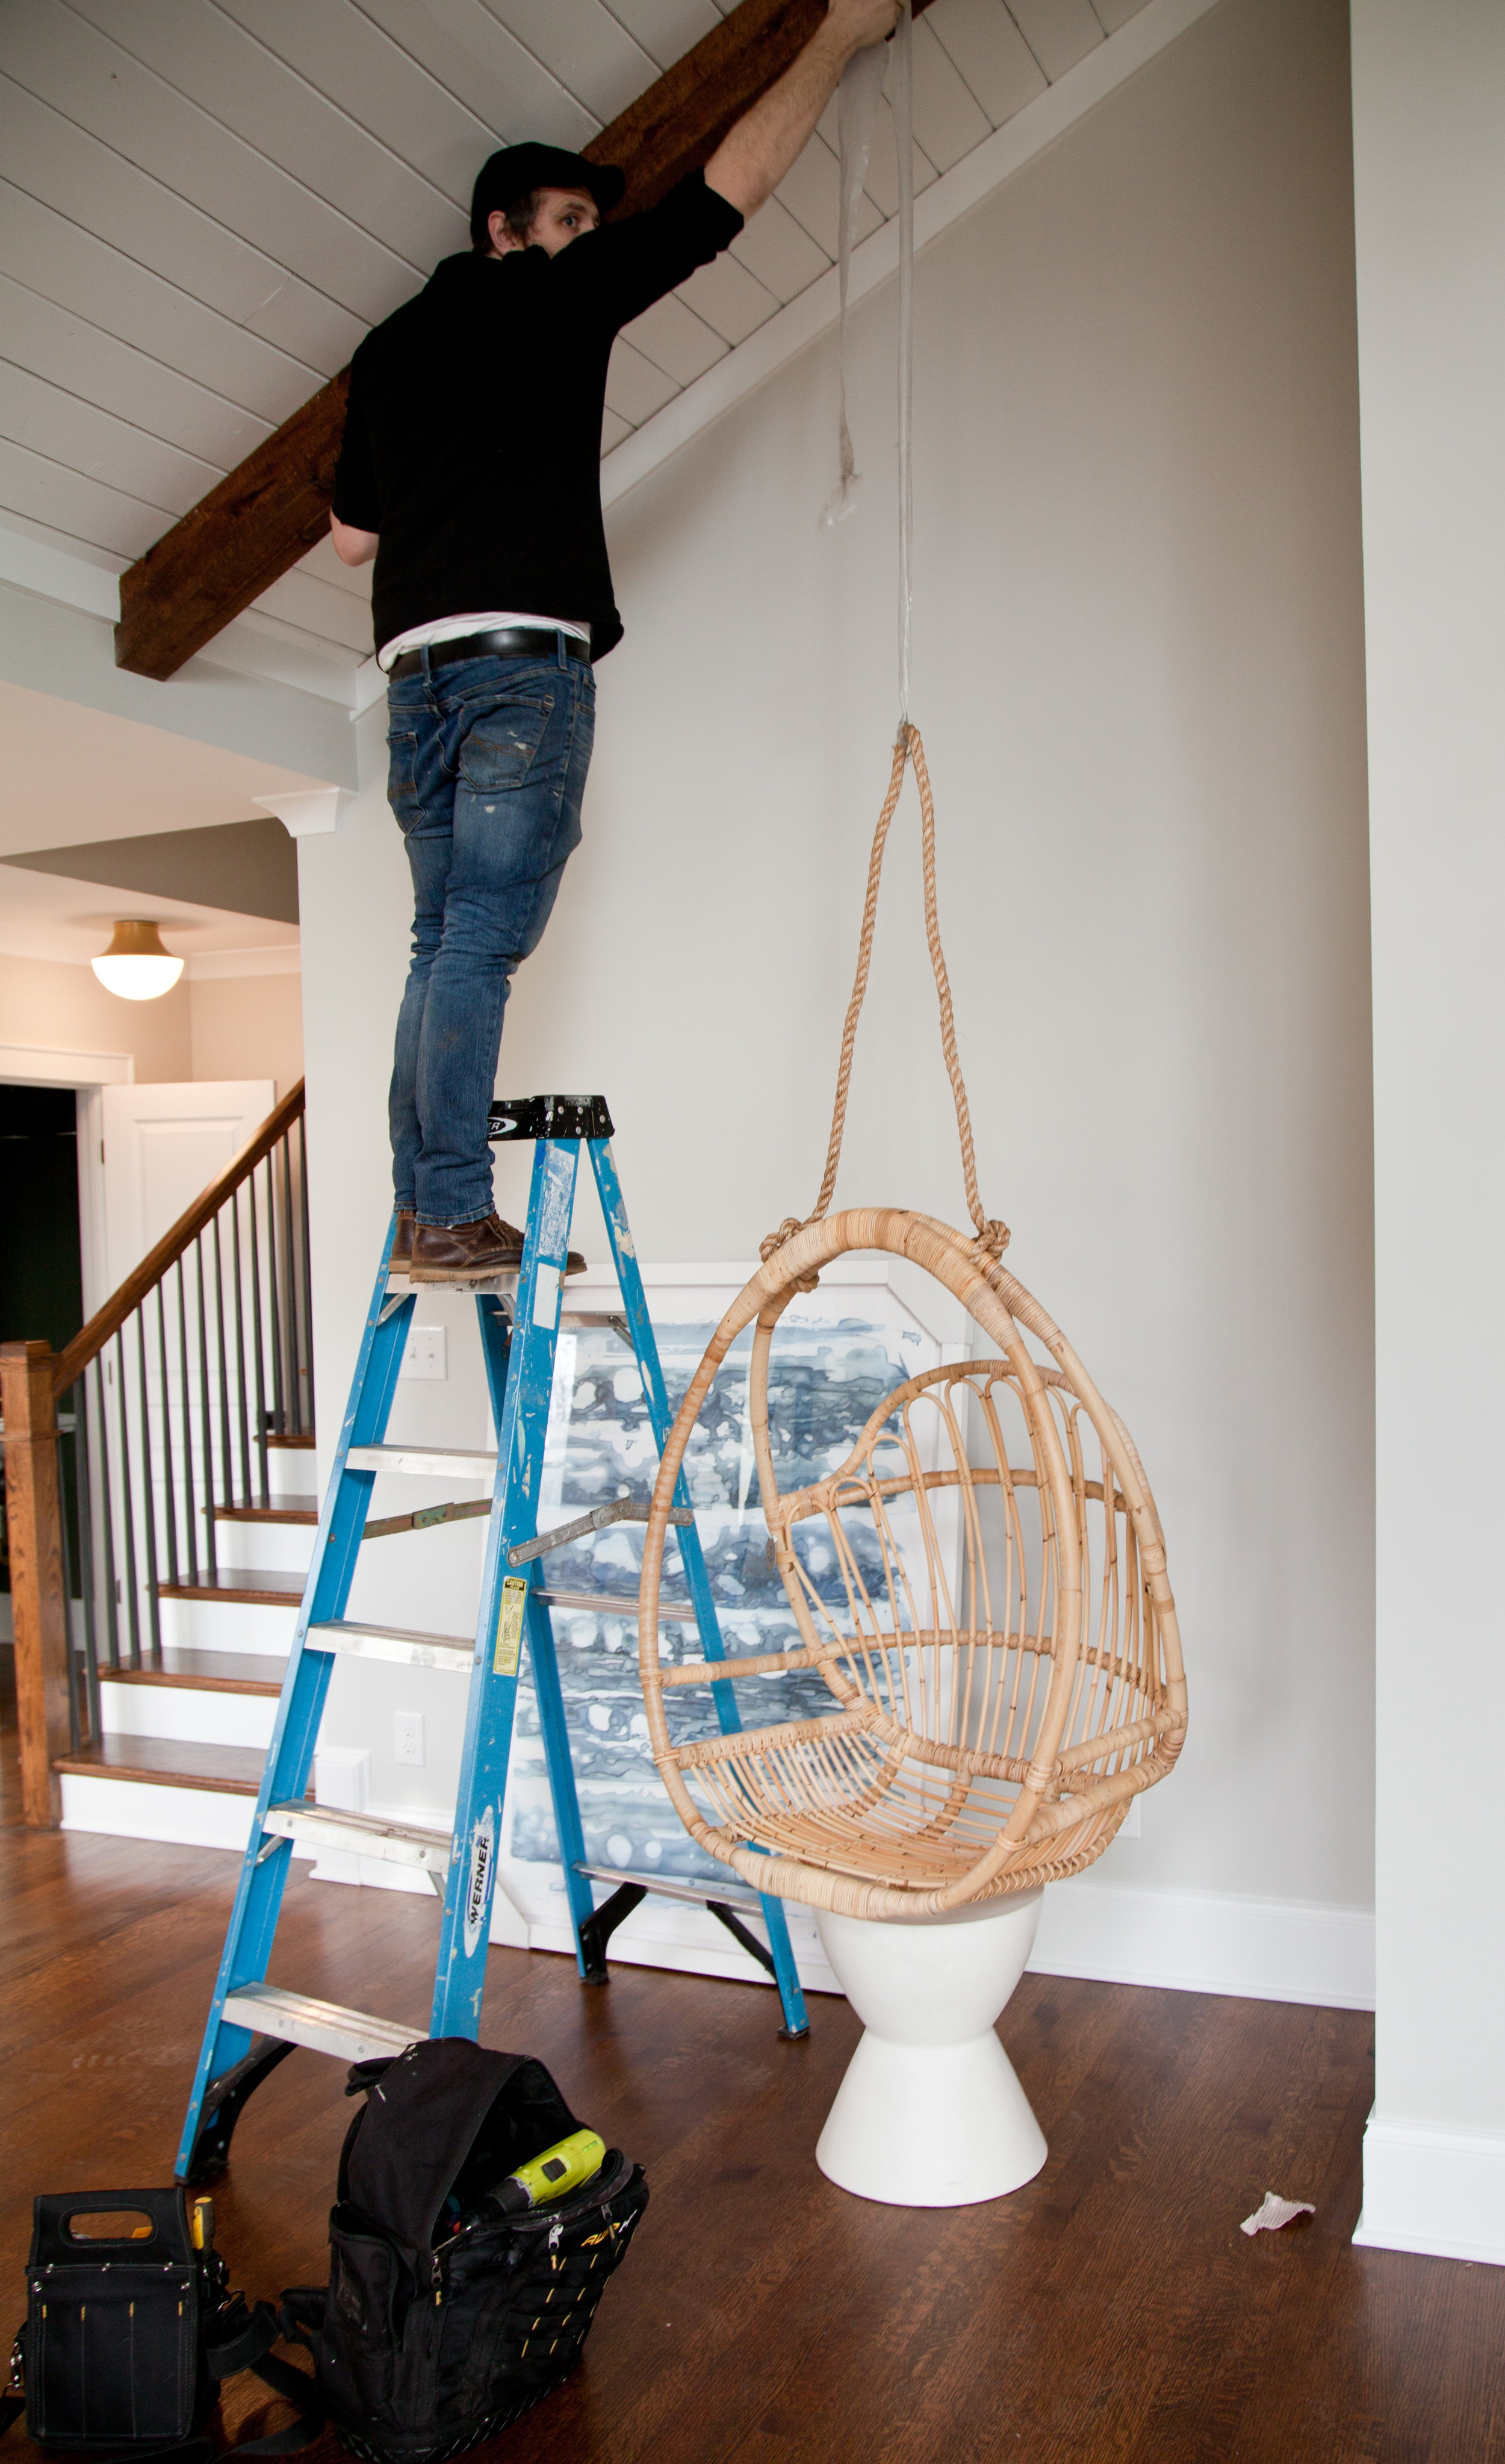 Hanging Chair Tutorial House Of Nomad, How To Hang Chair From Ceiling Without Drilling